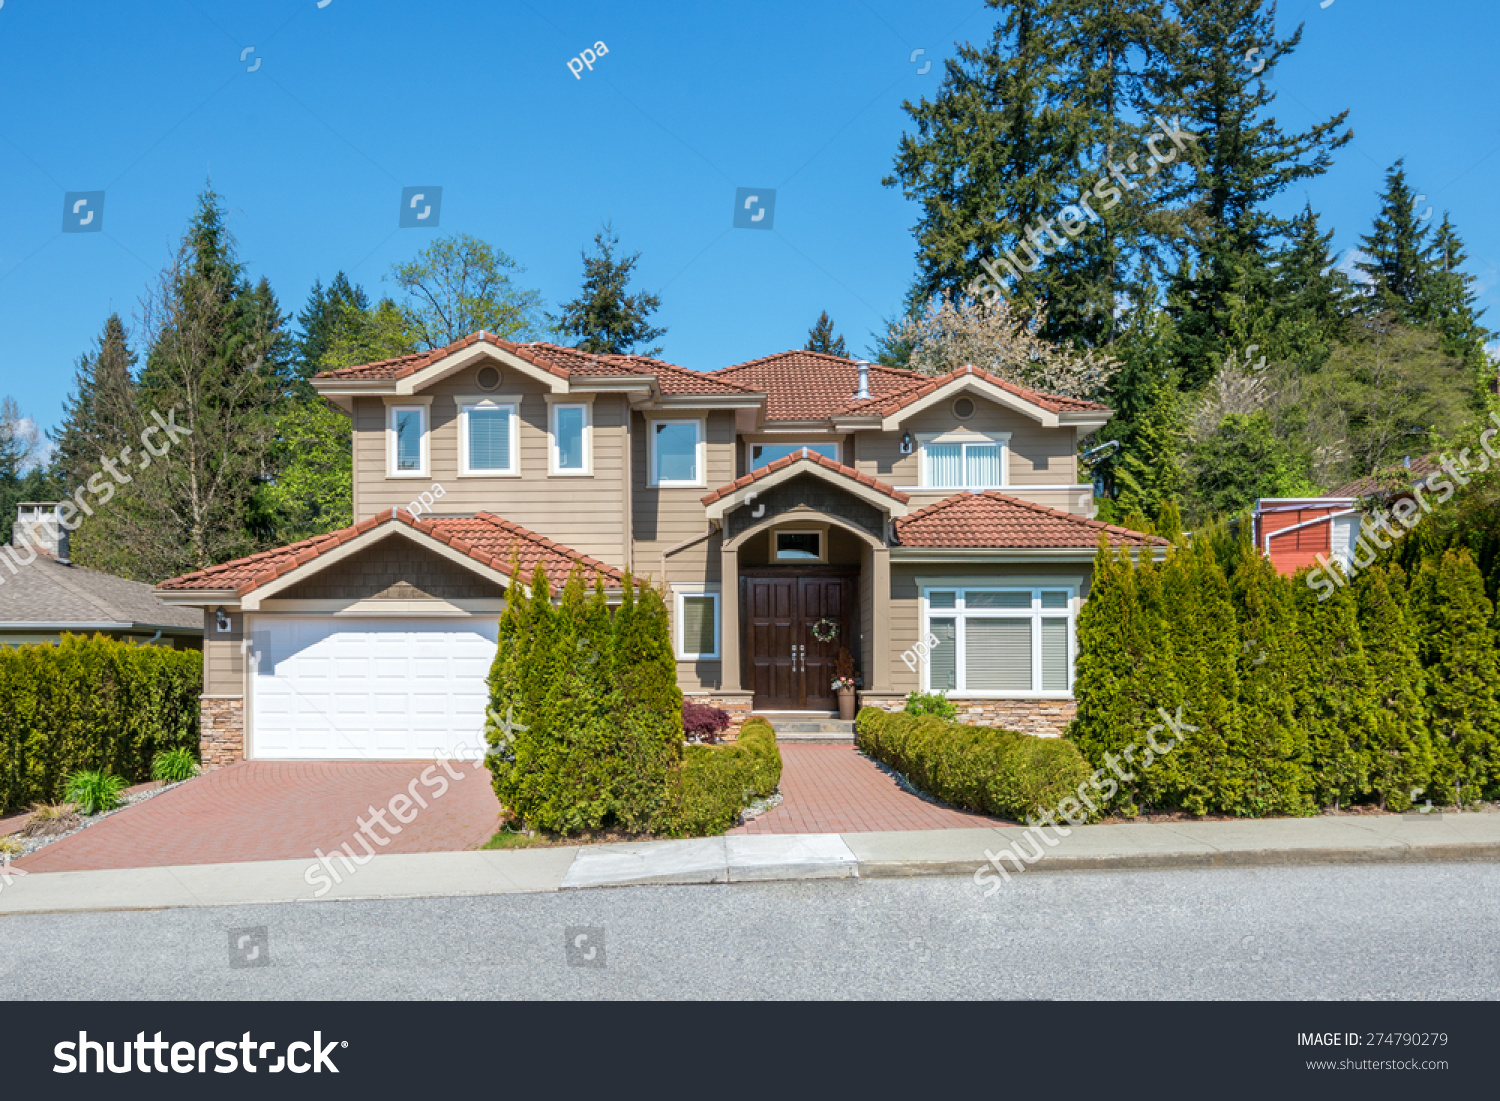 Luxury house with beautiful landscaping on a sunny day. Home exterior. #274790279